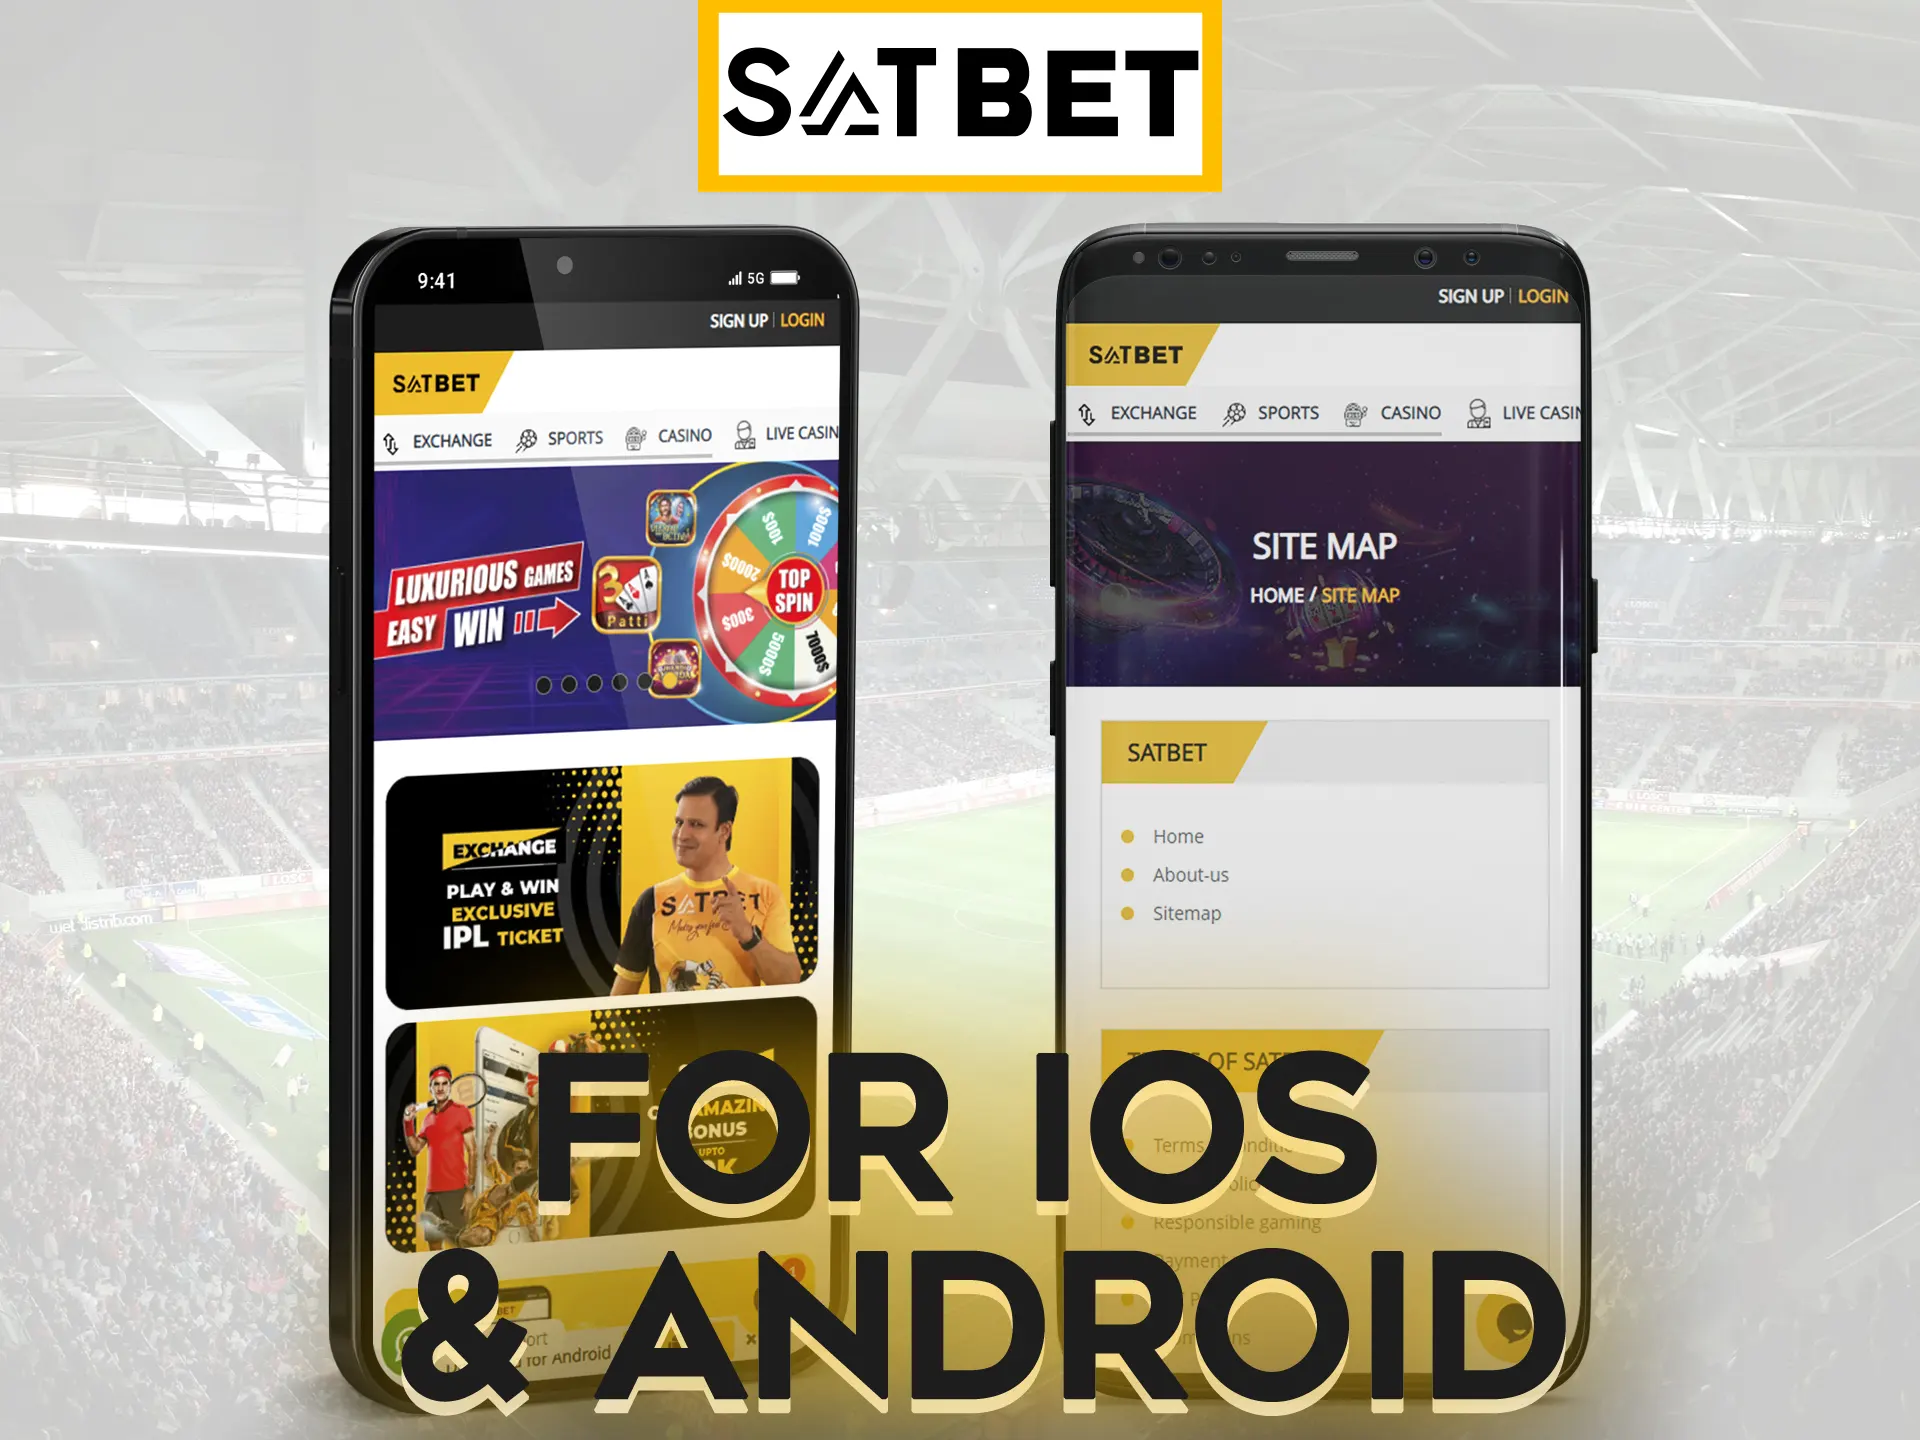 You can install Satbet app on your Android and iOS devices.